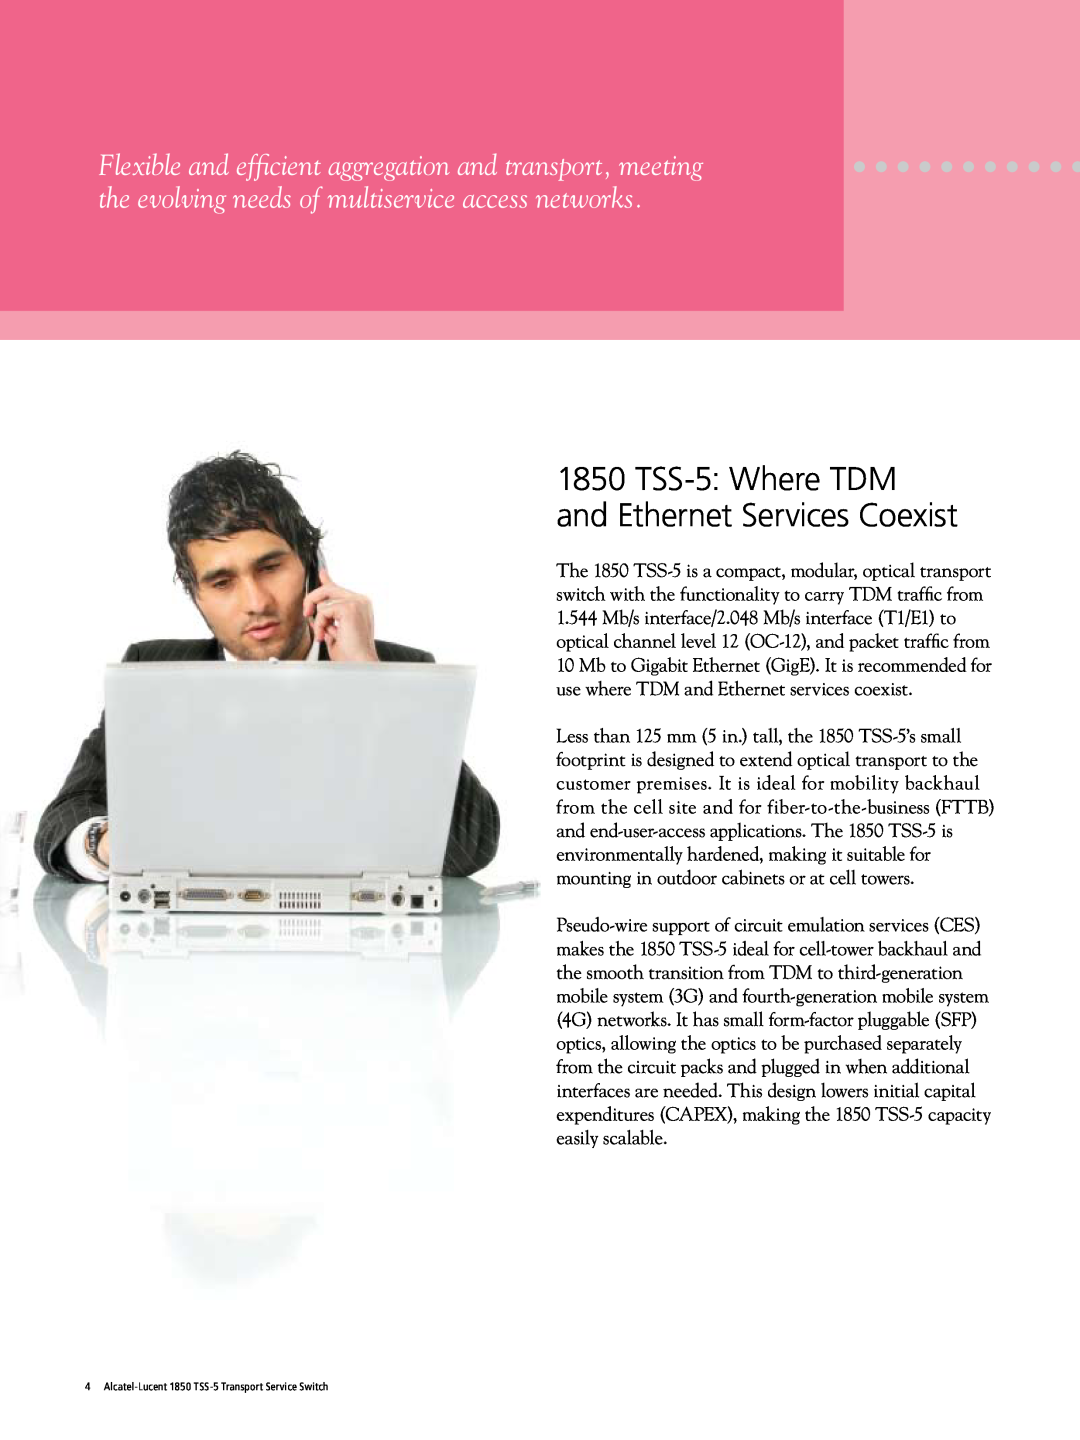 Alcatel Carrier Internetworking Solutions 1850 TSS-5 manual TSS-5 Where TDM and Ethernet Services Coexist 